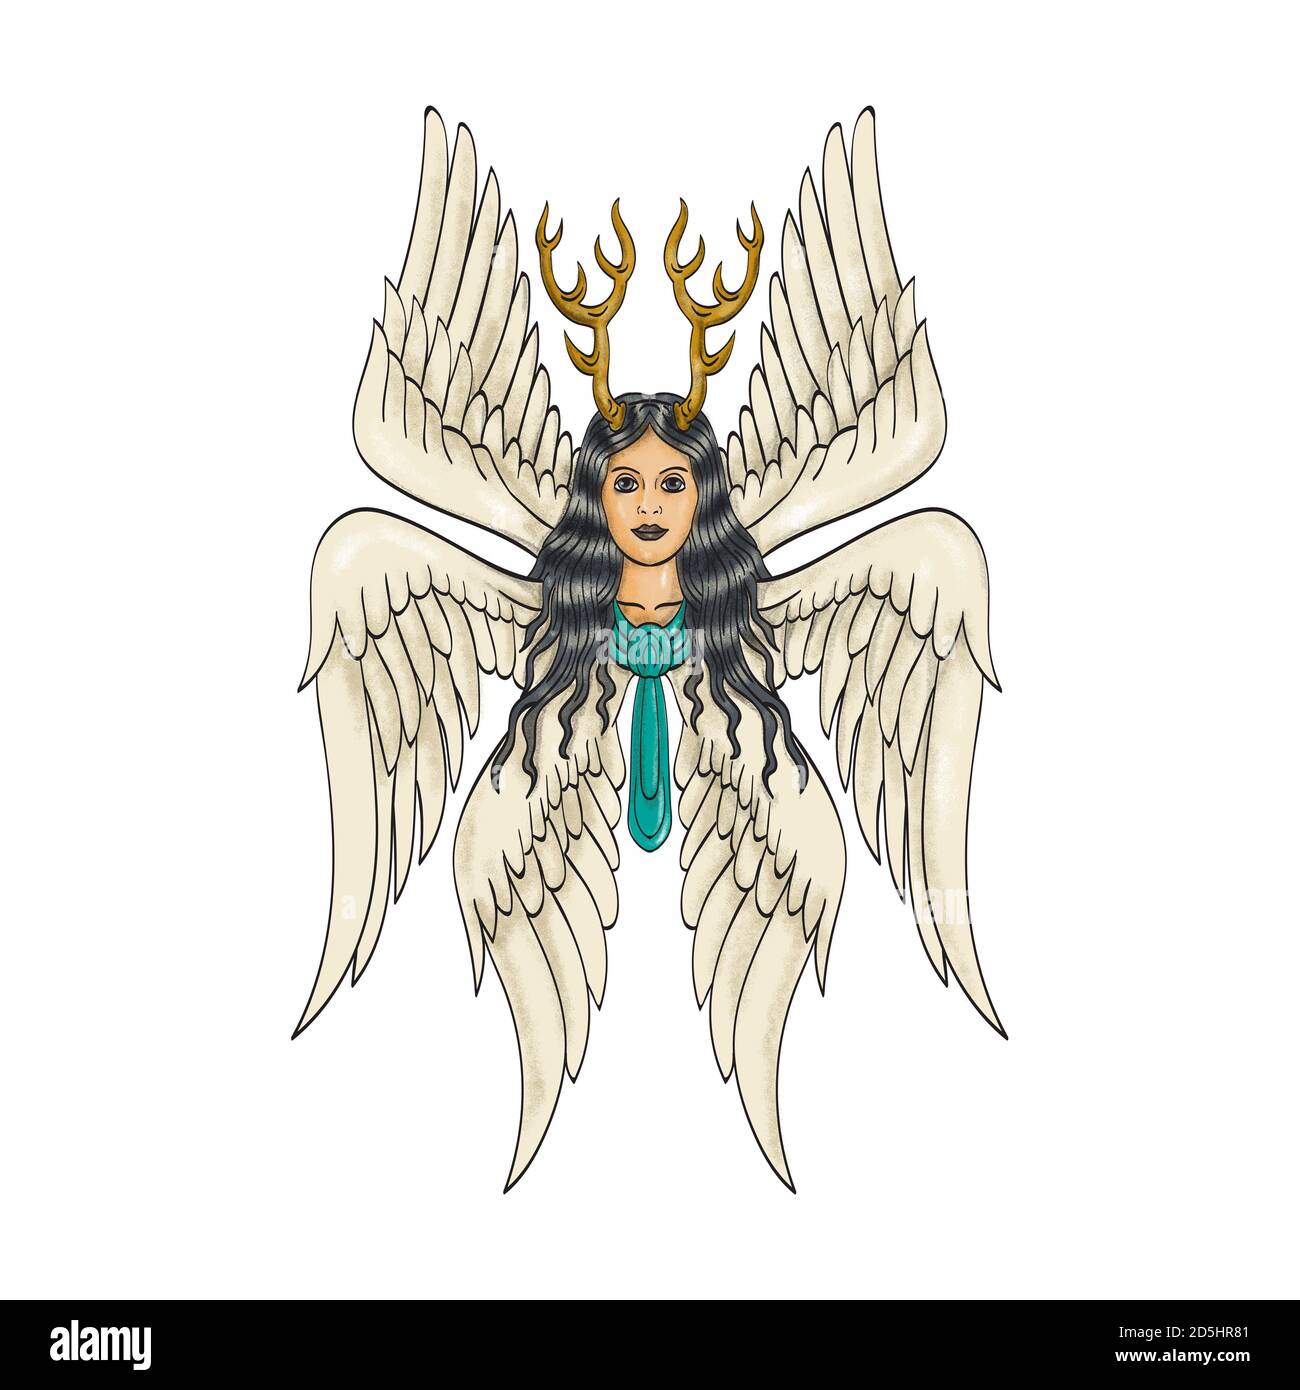 Tattoo style illustration of seraph or seraphim, a six-winged fiery angel with six wings and deer antlers viewed from front done in full color. Stock Photo